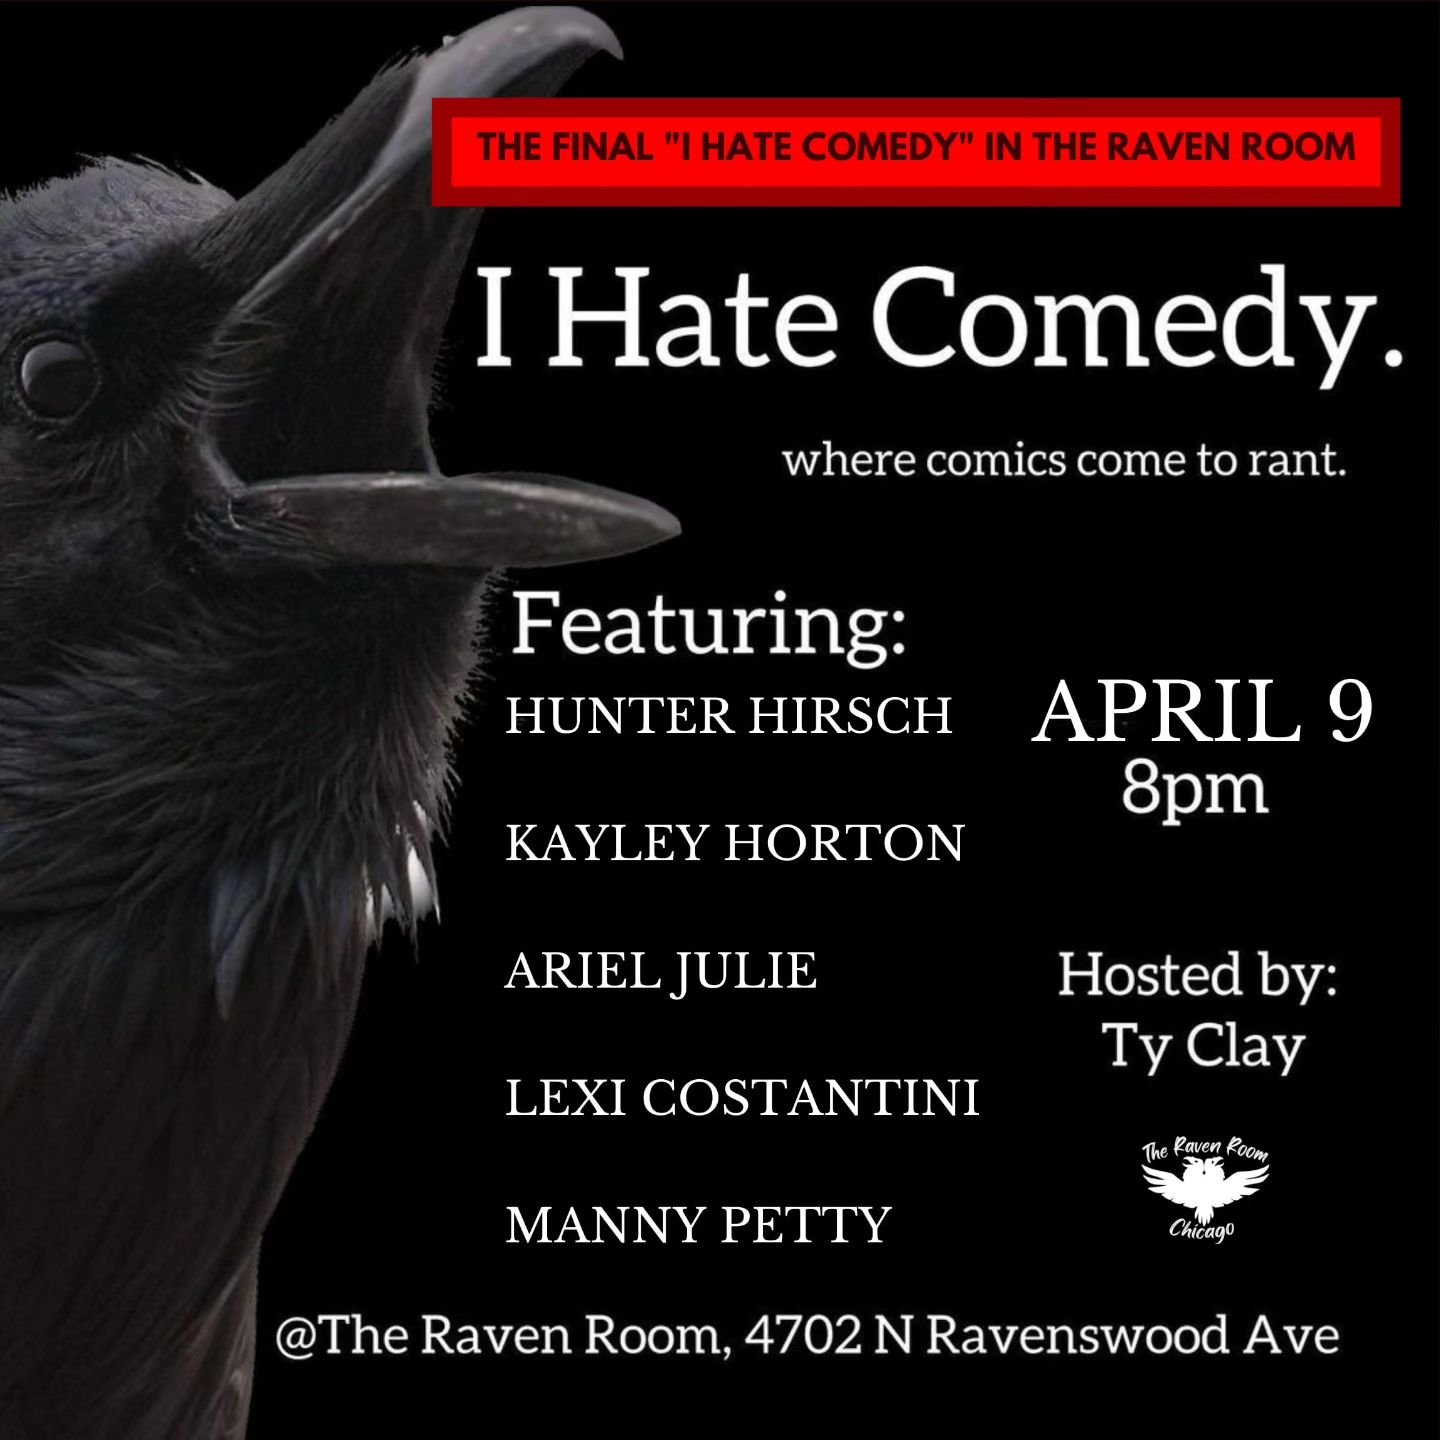 Join us TONIGHT for the last stand-up comedy show in the Raven Room!! Bring your laughter, and we'll do the rest! Free admission, show starts at 8 pm!